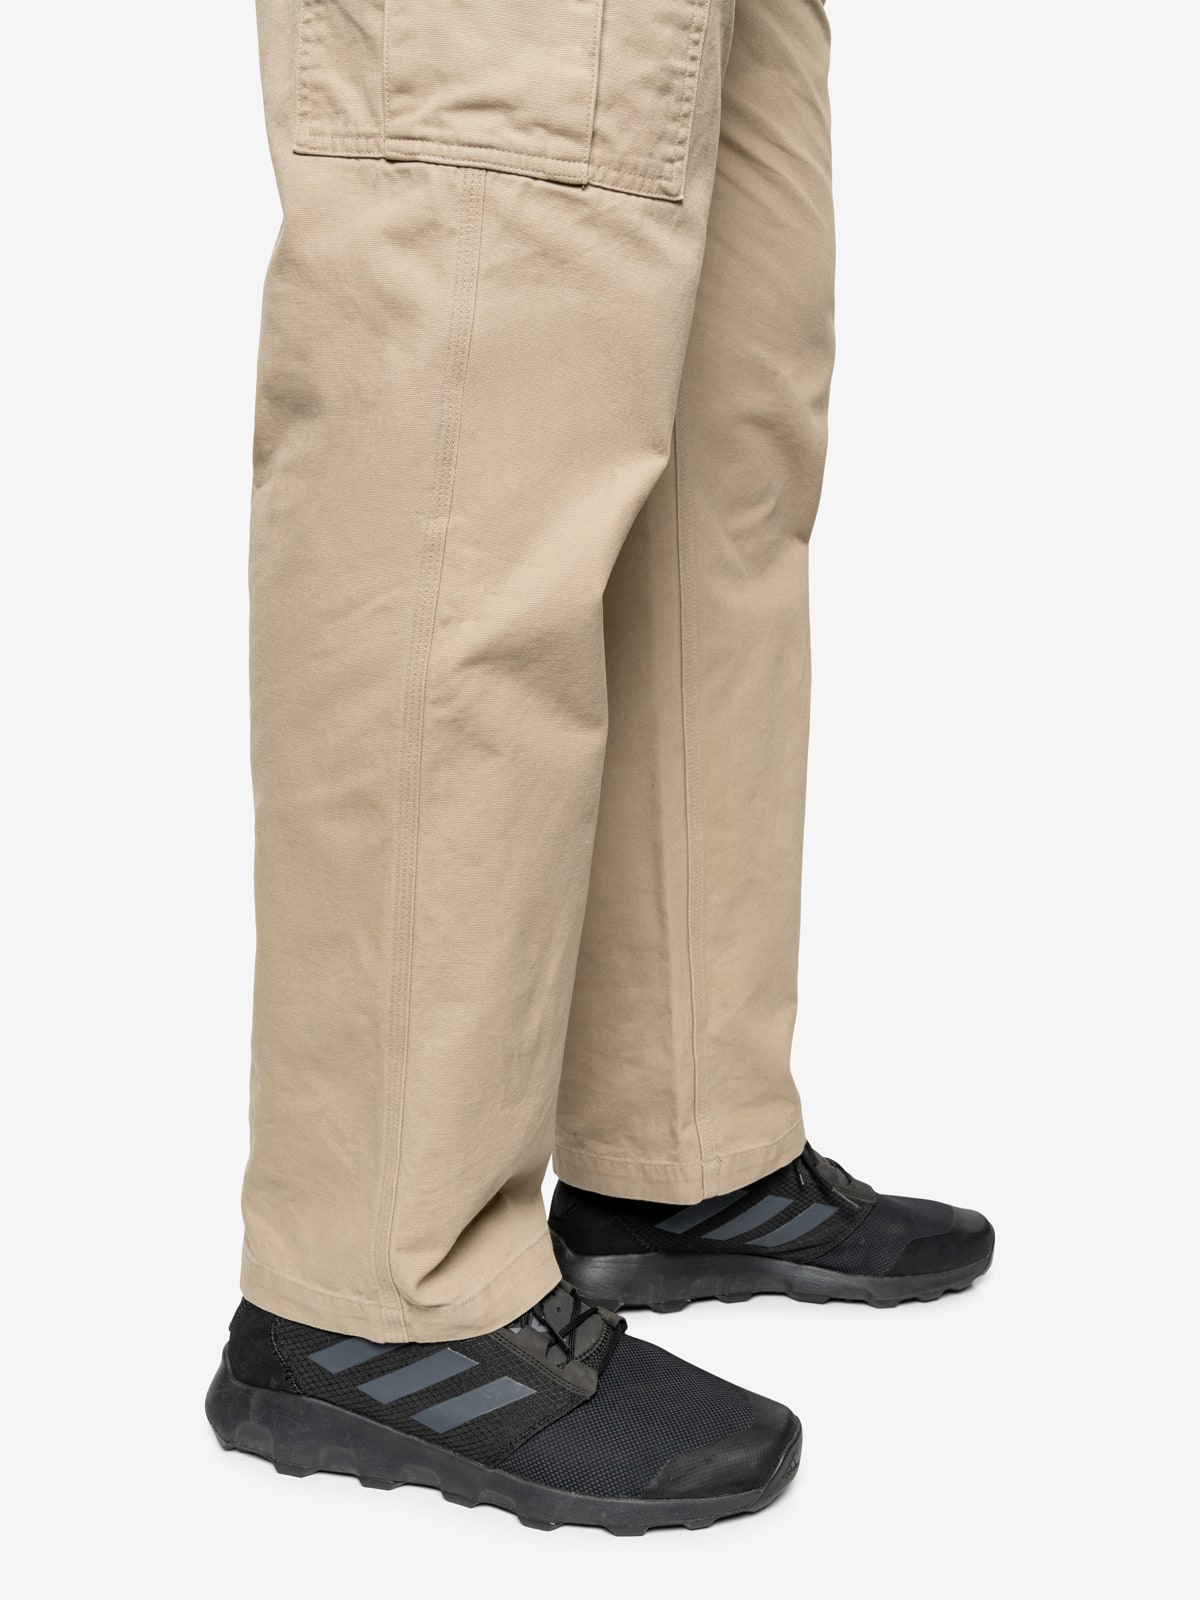 Insect Shield Men's Multi-Function Cargo Pant